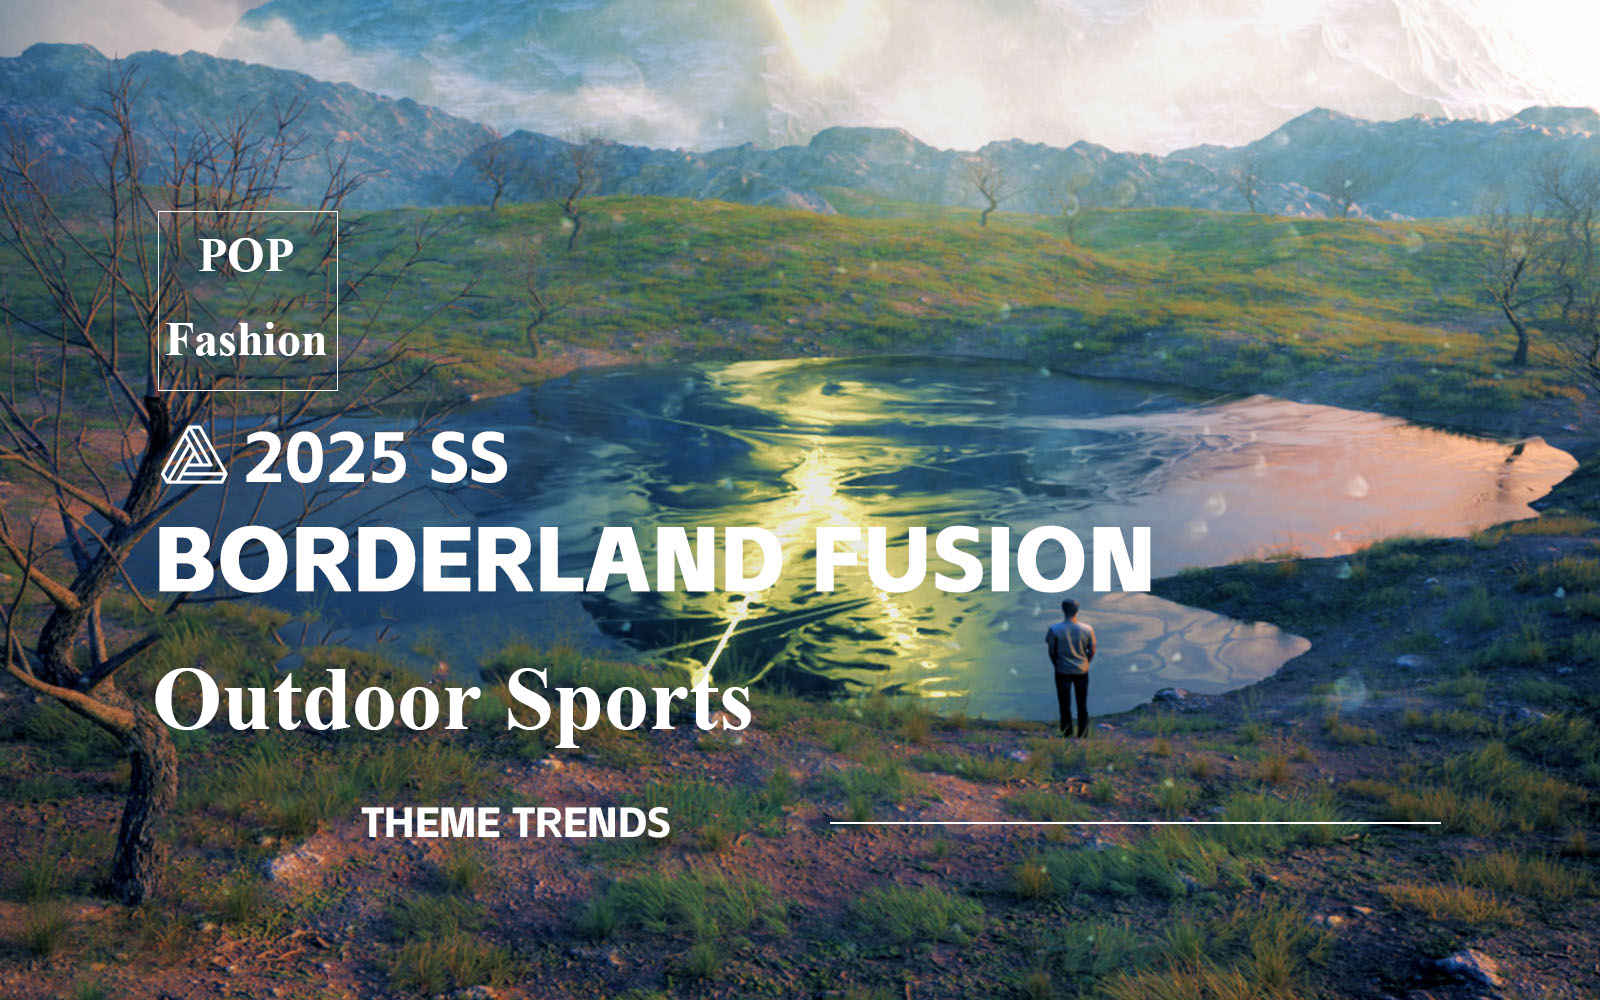 Borderland Fusion -- S/S 2025 Outdoor Sports Trend